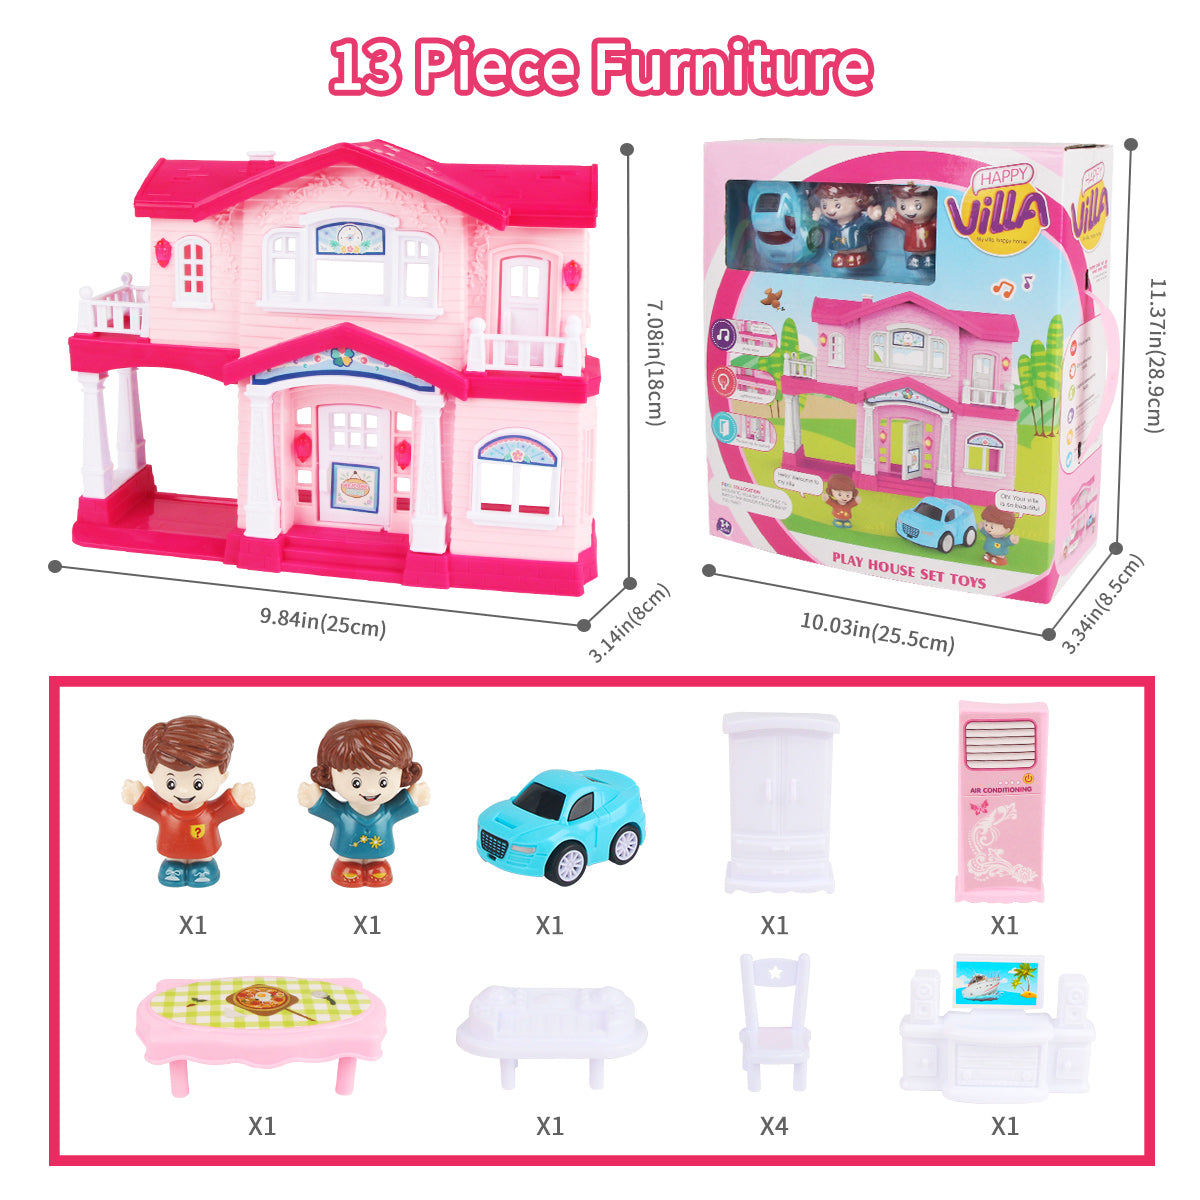 Joyfia 2-Story Doll House, Dollhouse with 2 Figures and Furniture, Dream House with Doorbell & Light for Role Pretend Play, 13 Piece Toddler Playhouse Gift Toys for 3-8 Years Old Girls Boys Kids